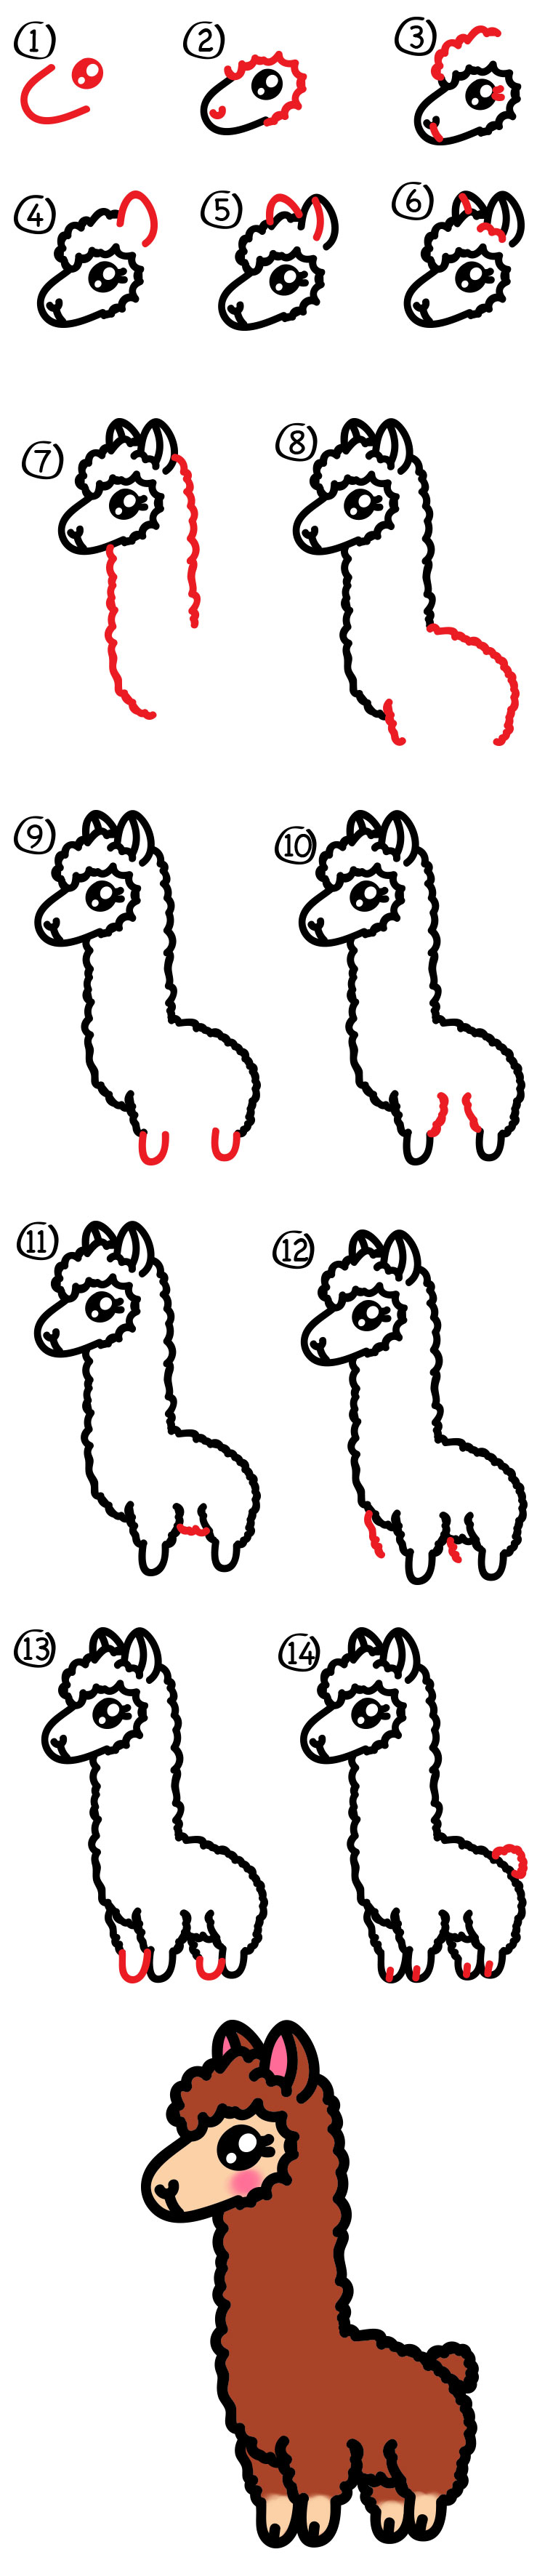 how to draw a llama